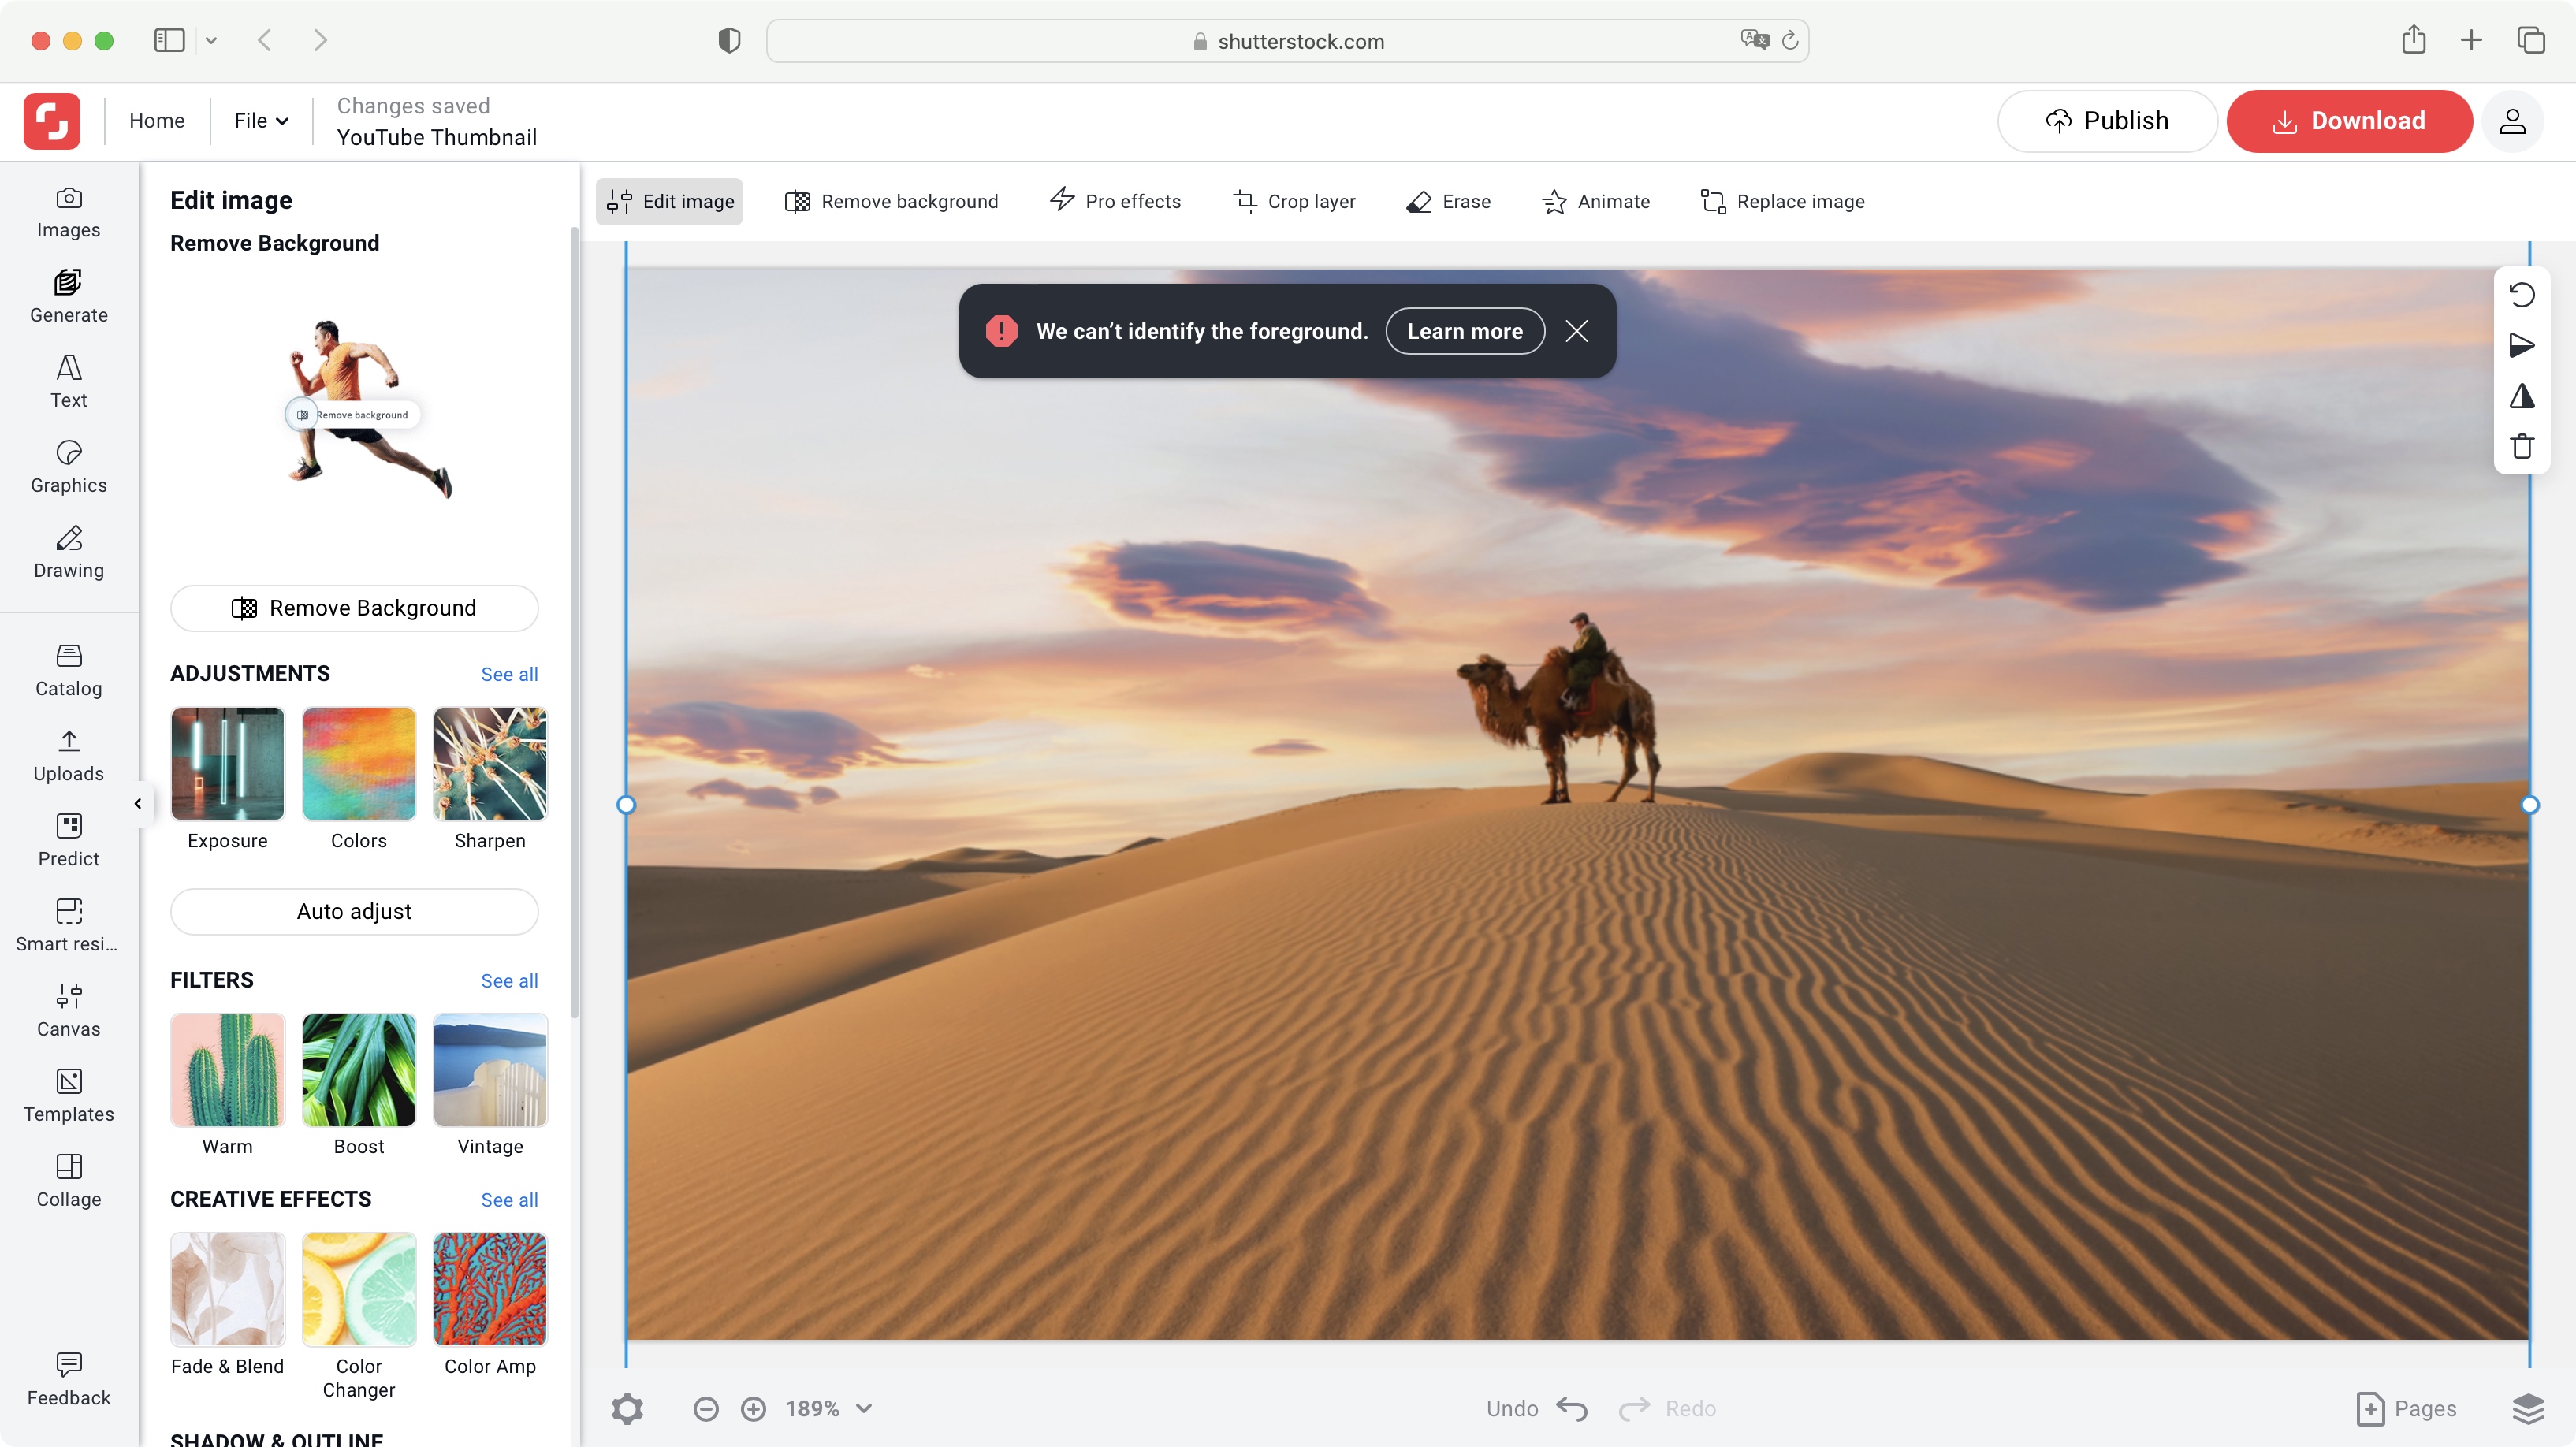 Shutterstock's Creative Flow Plus platform during our test and review process